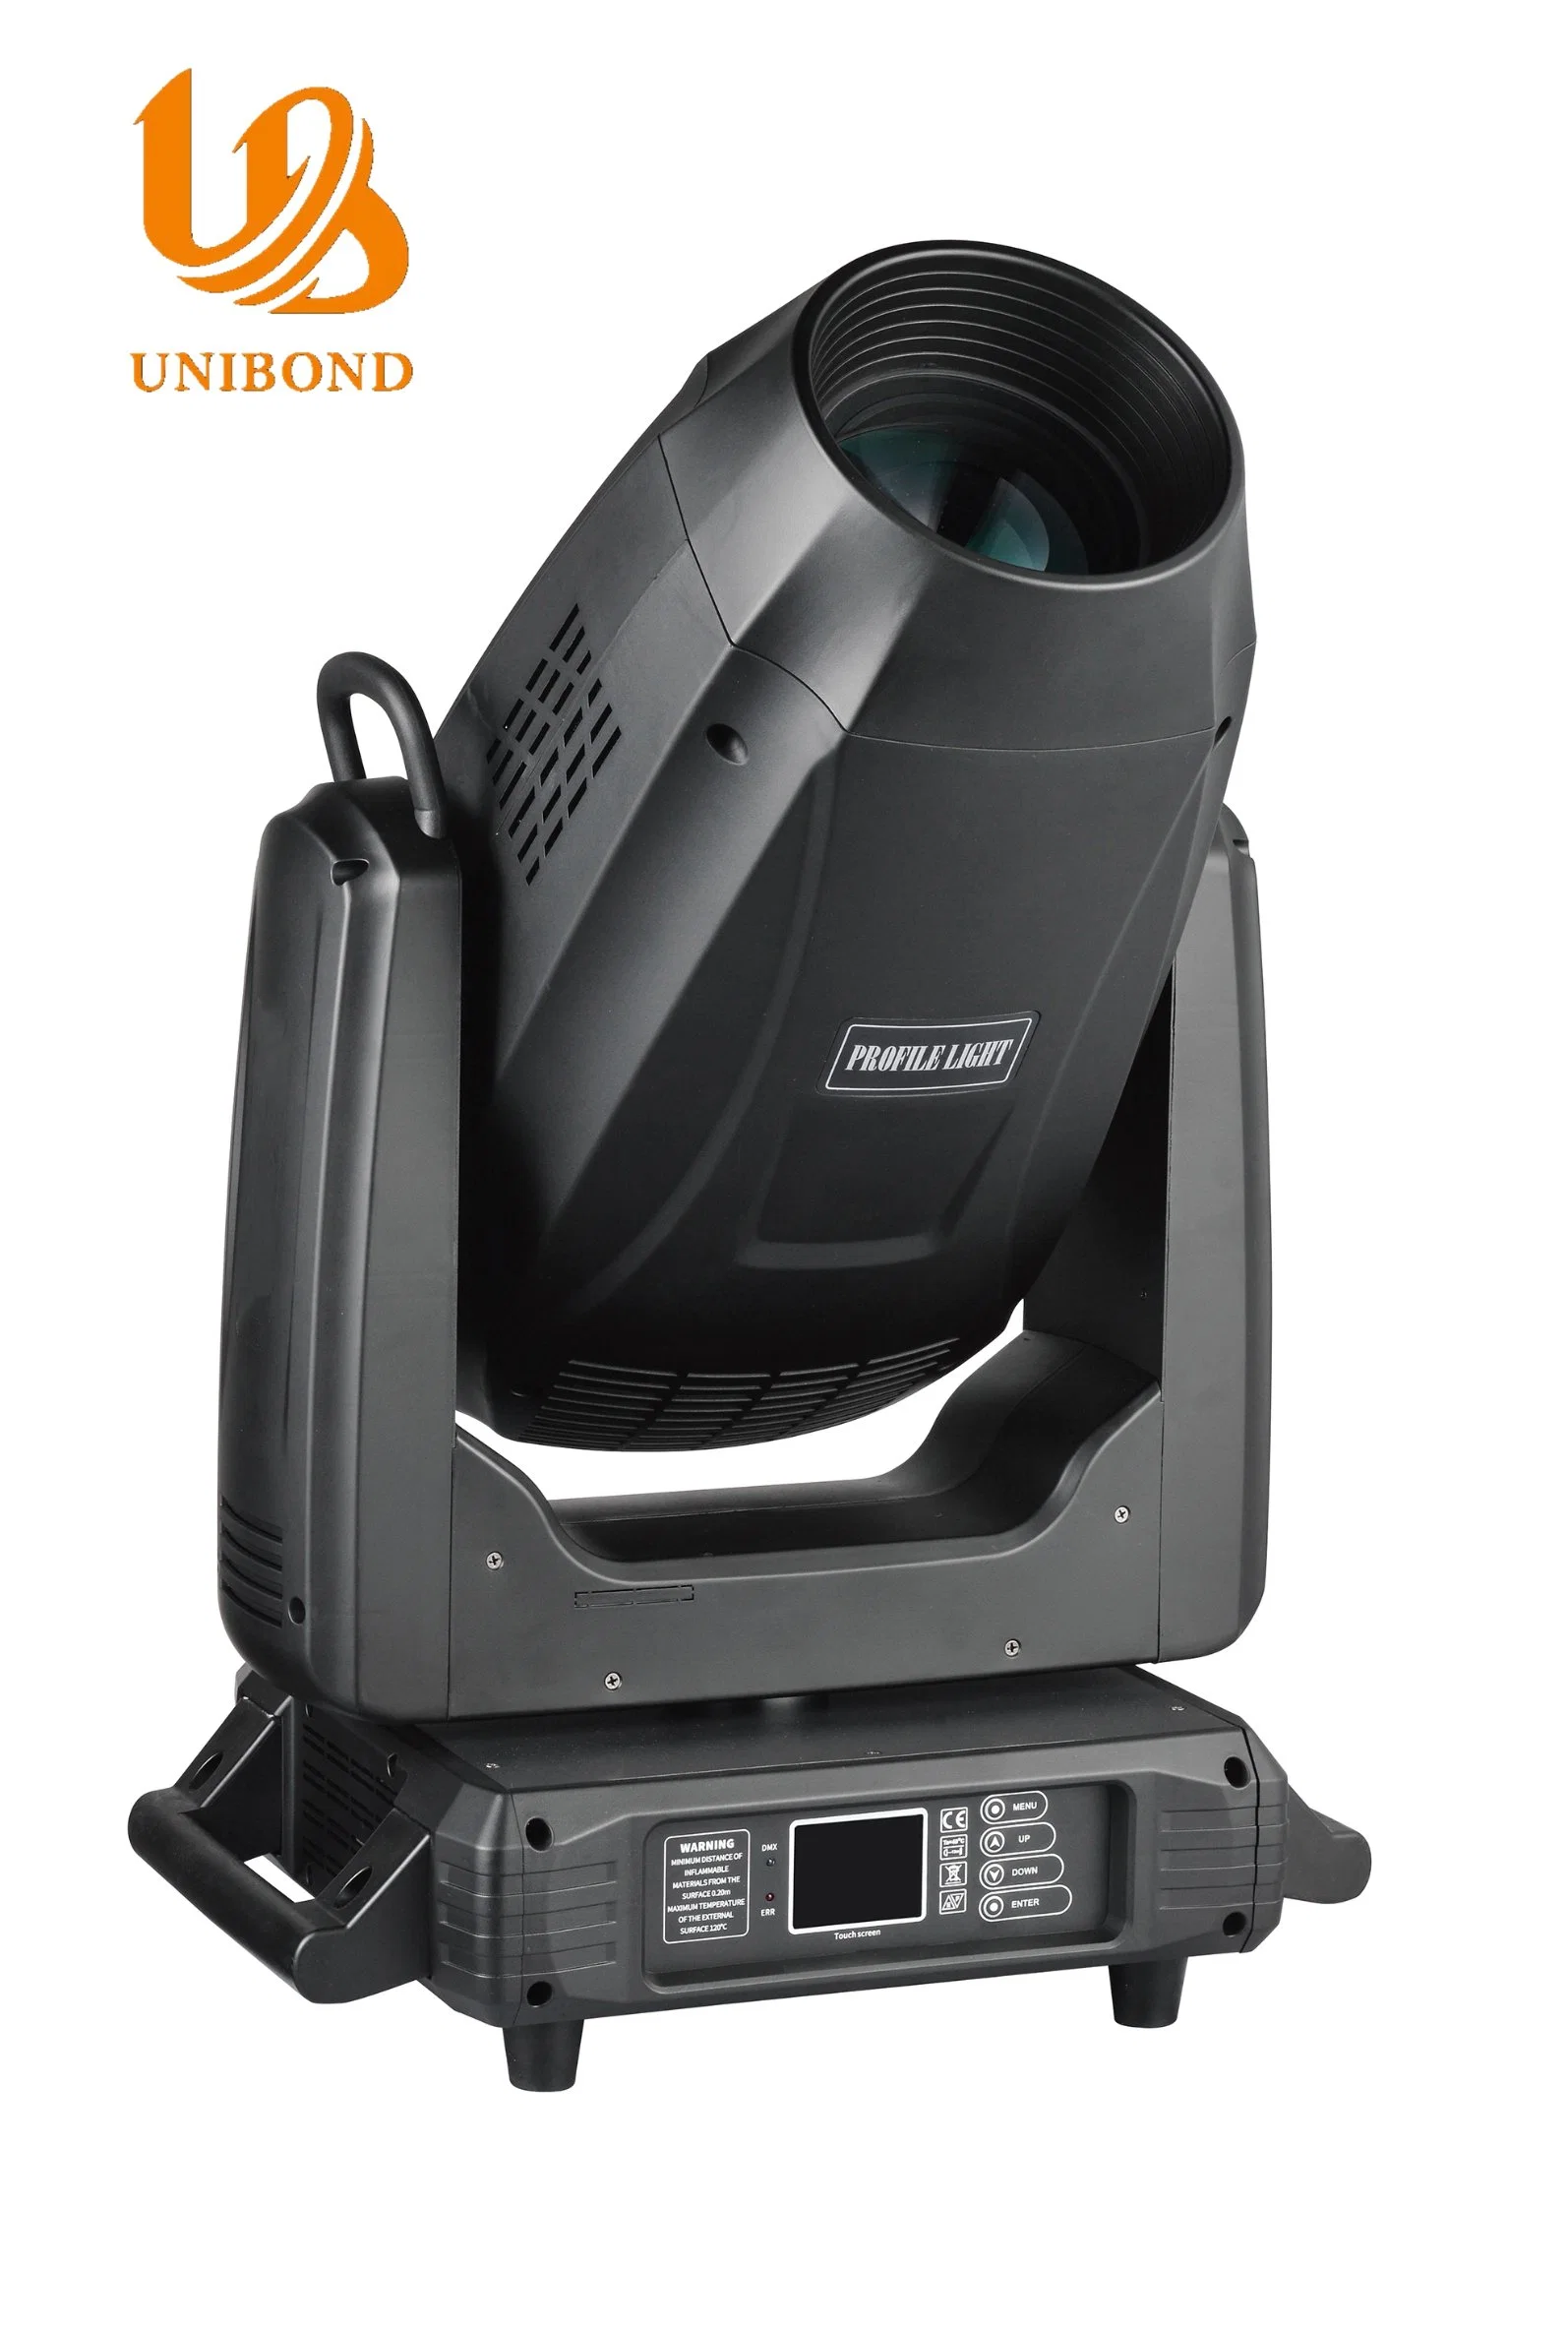 LED 700W Bsw Cmy Profile Moving Head Stage Light